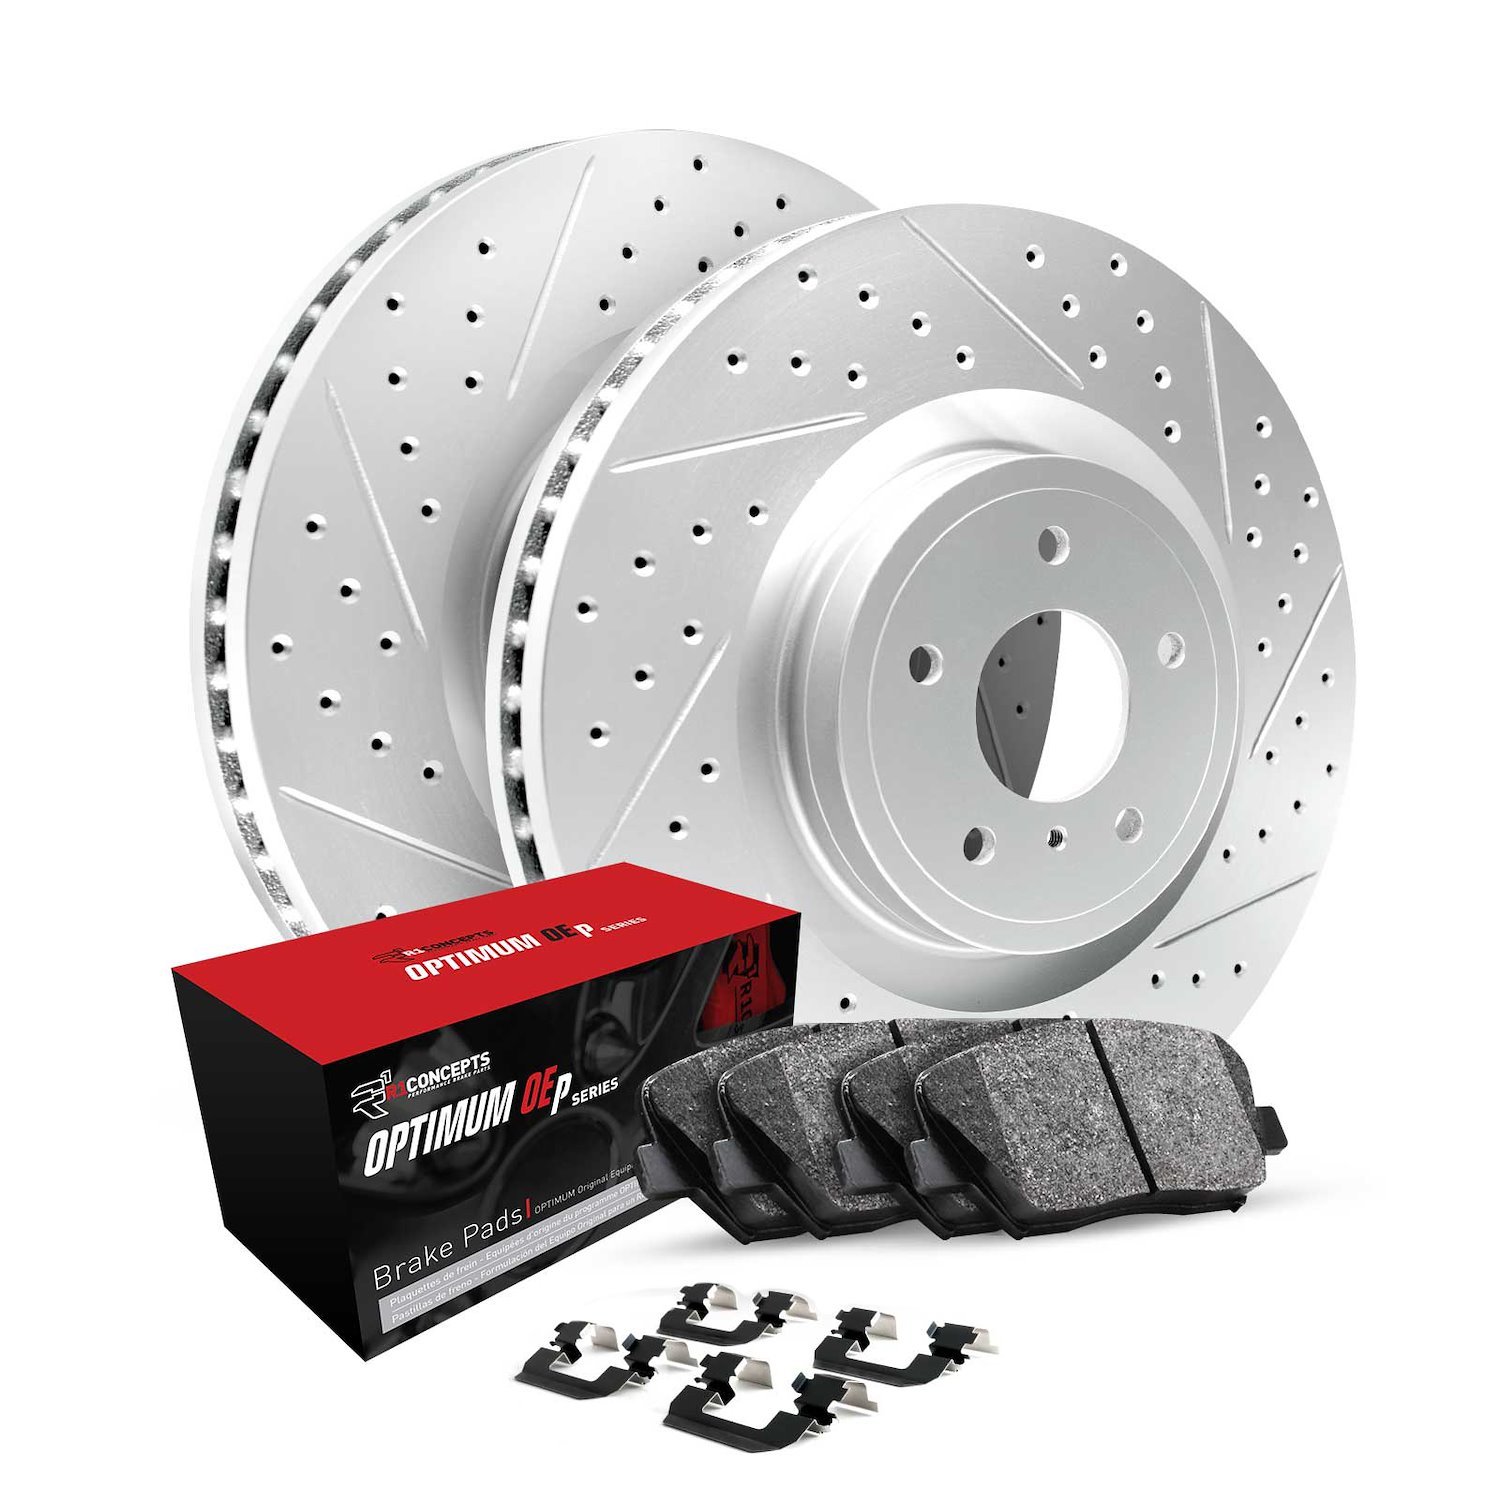 GEO-Carbon Drilled & Slotted Brake Rotor Set w/Optimum OE Pads & Hardware, 1990-2005 Fits Multiple Makes/Models